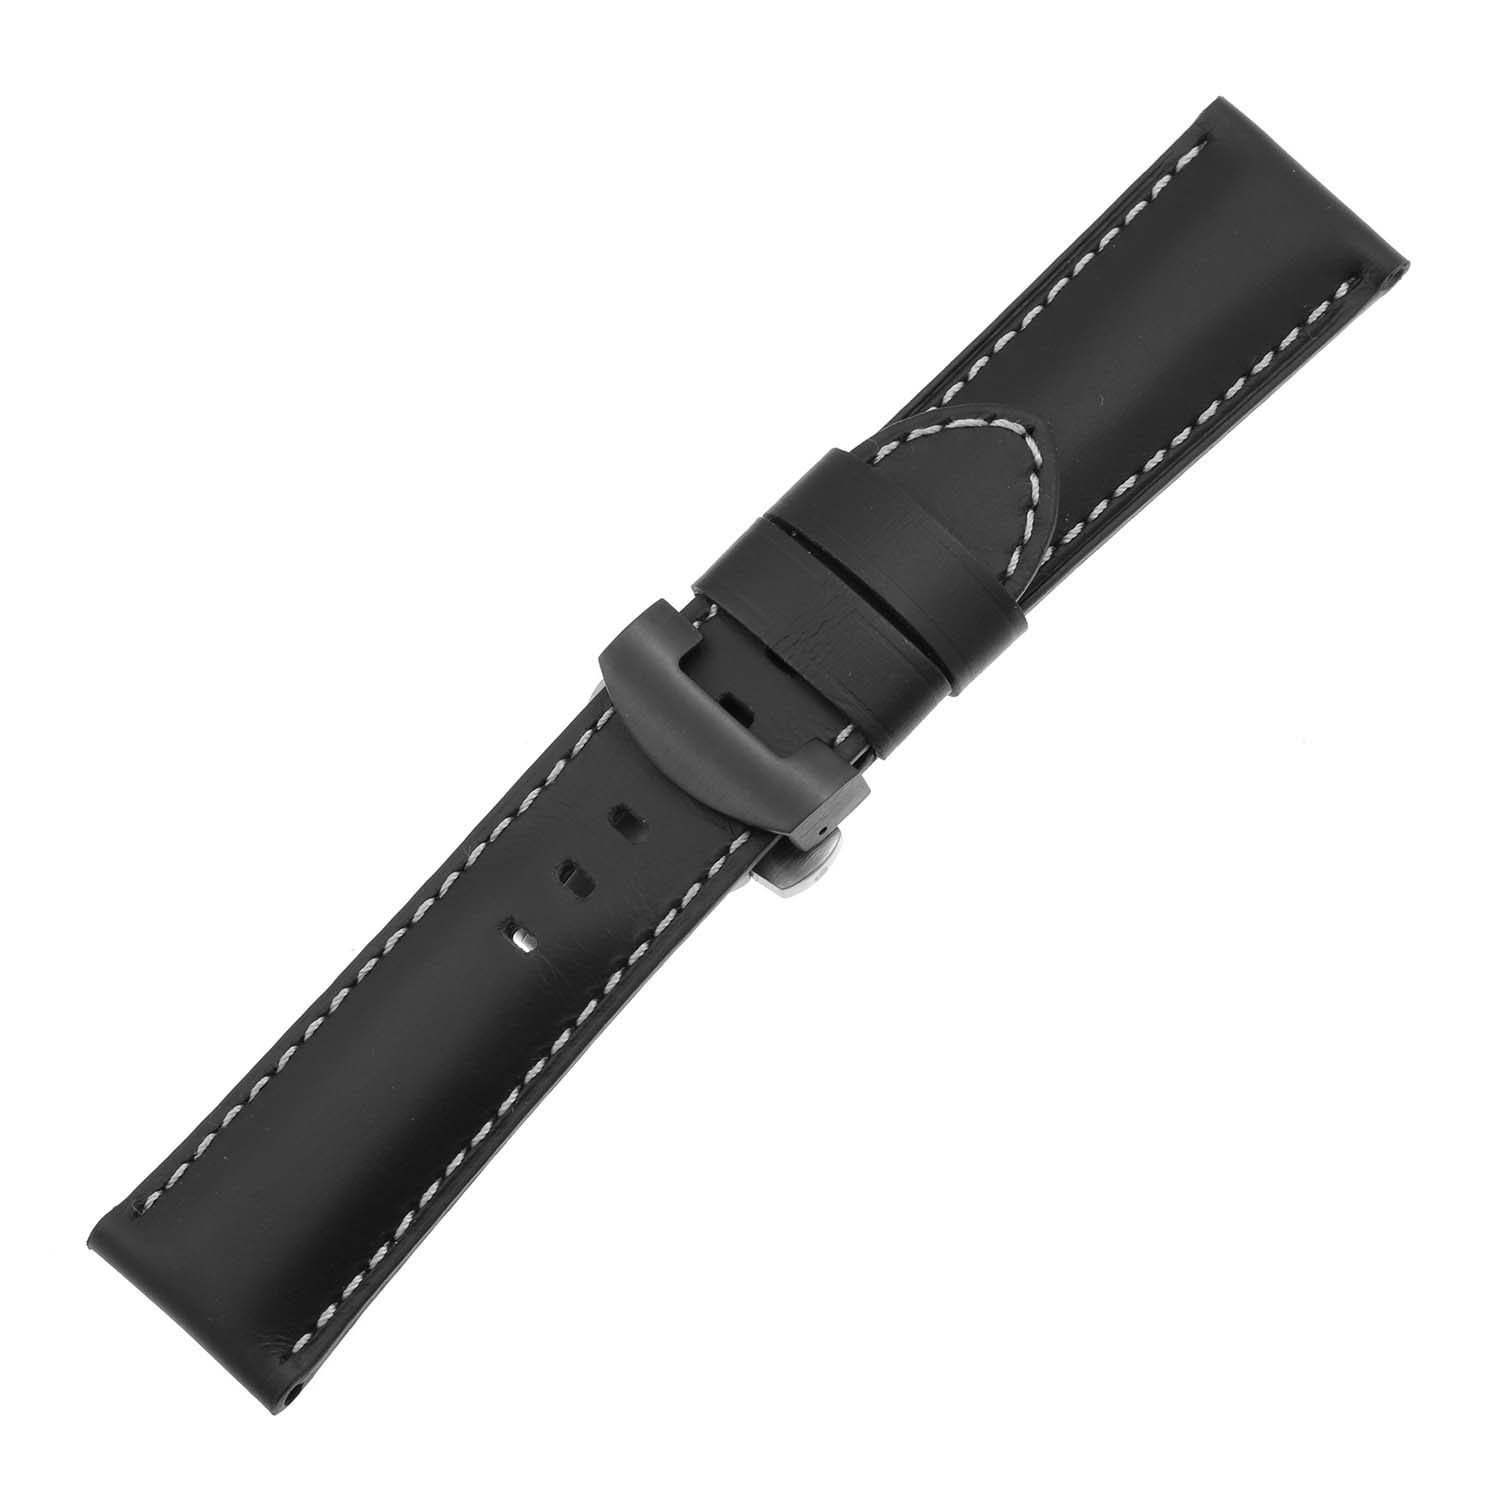 Ps5.1.mb Main Black Smooth Leather Panerai Watch Band Strap With Black Deployant Clasp Apple Watch